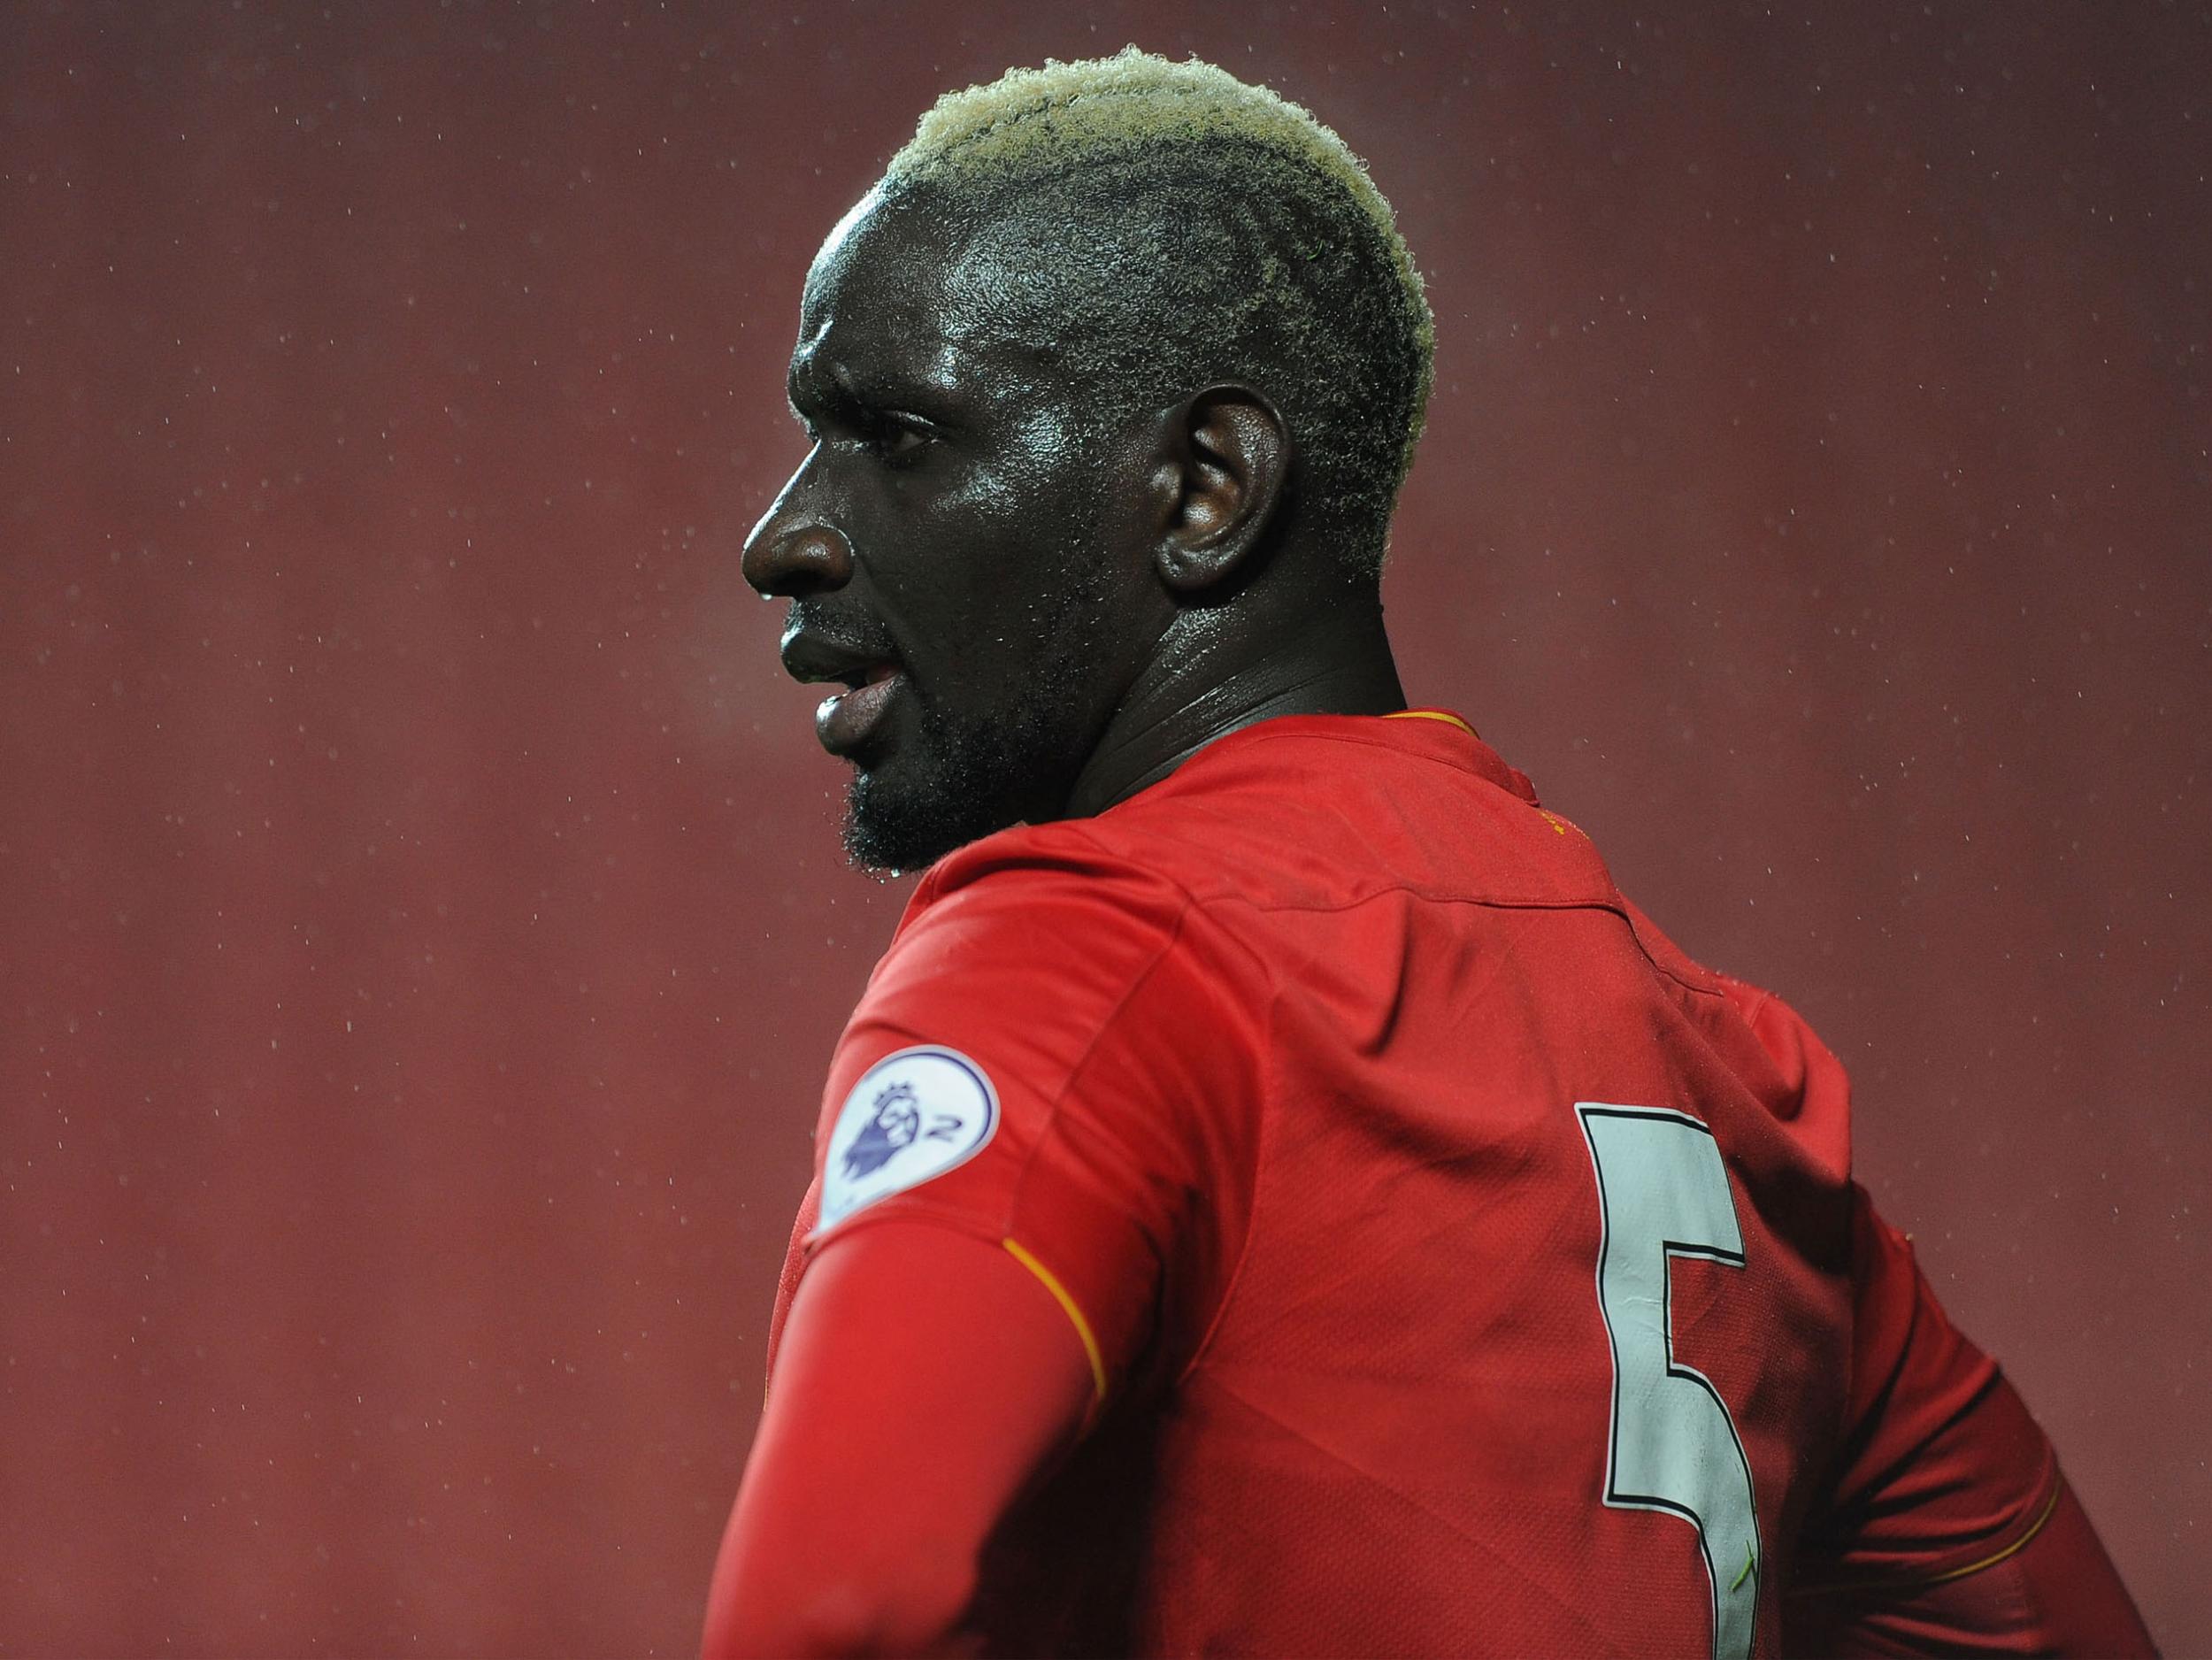 Sakho was sent home from Liverpool's preseason tour for disciplinary reasons